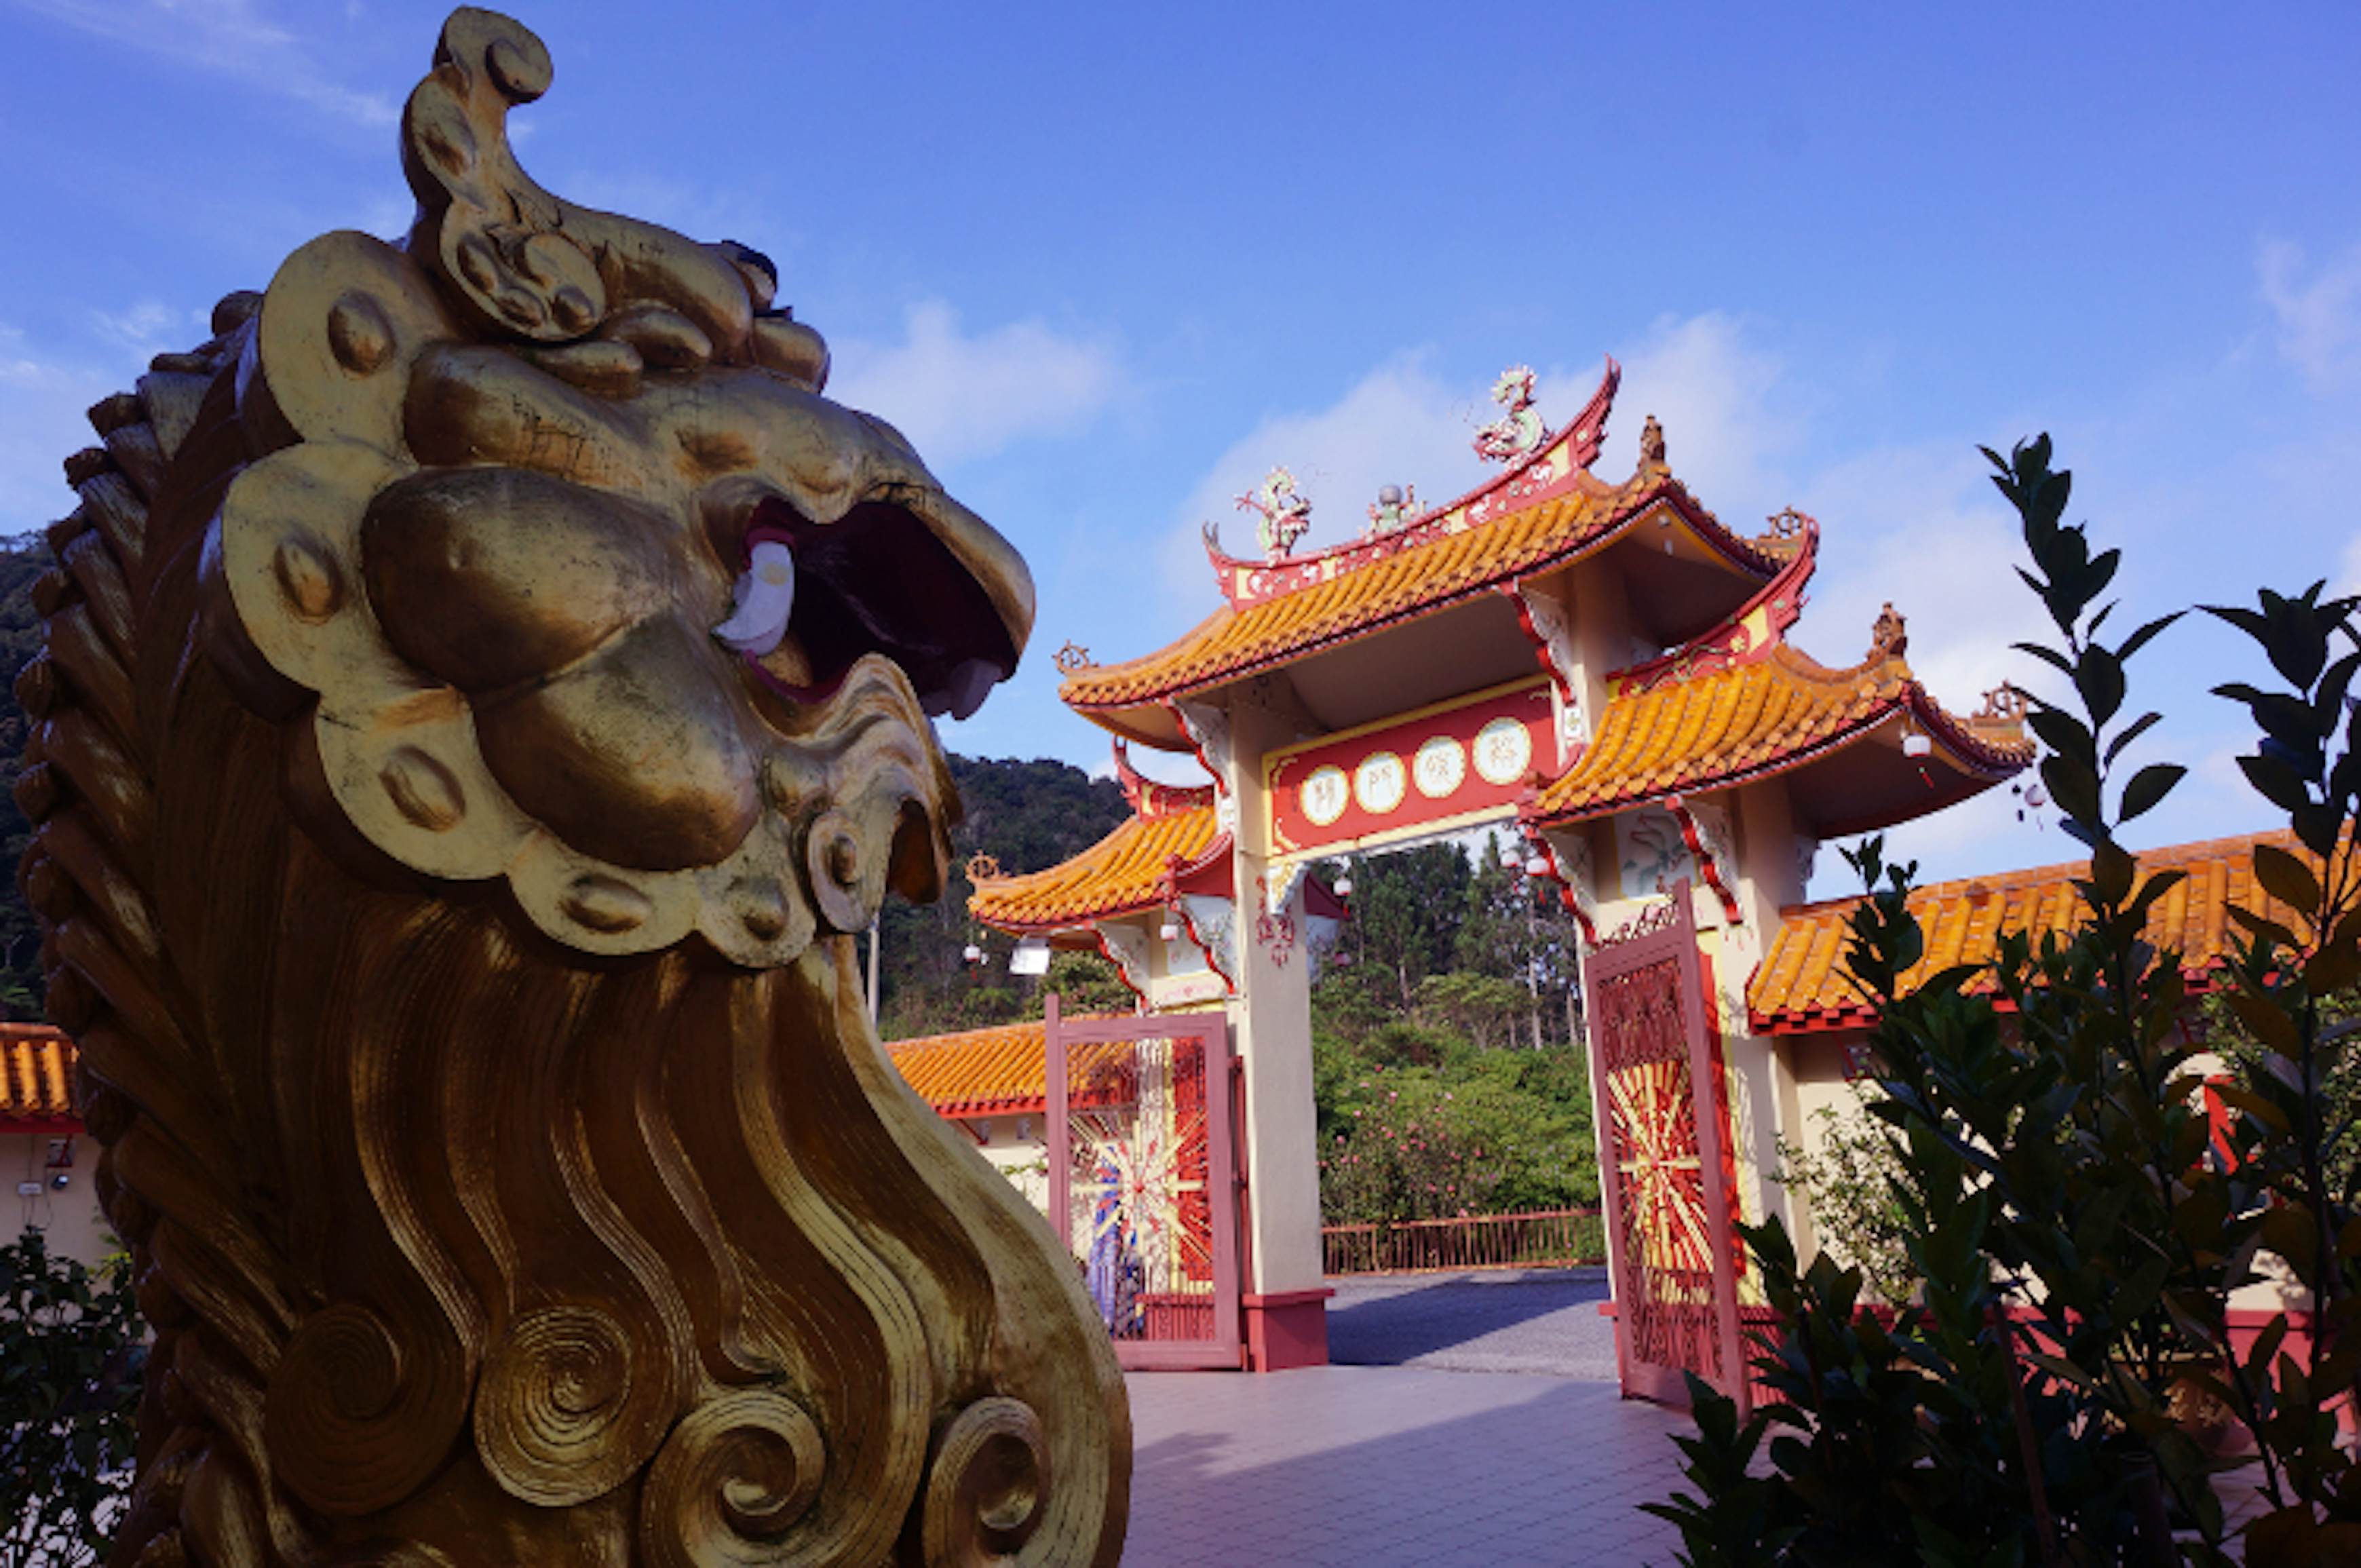 Golden Lions And Ornate Gateways At Sam Poh Tong Temple In The Cameron Highlands. Image By Anita Isalska ?auto=format&q=40&w=870&dpr=4